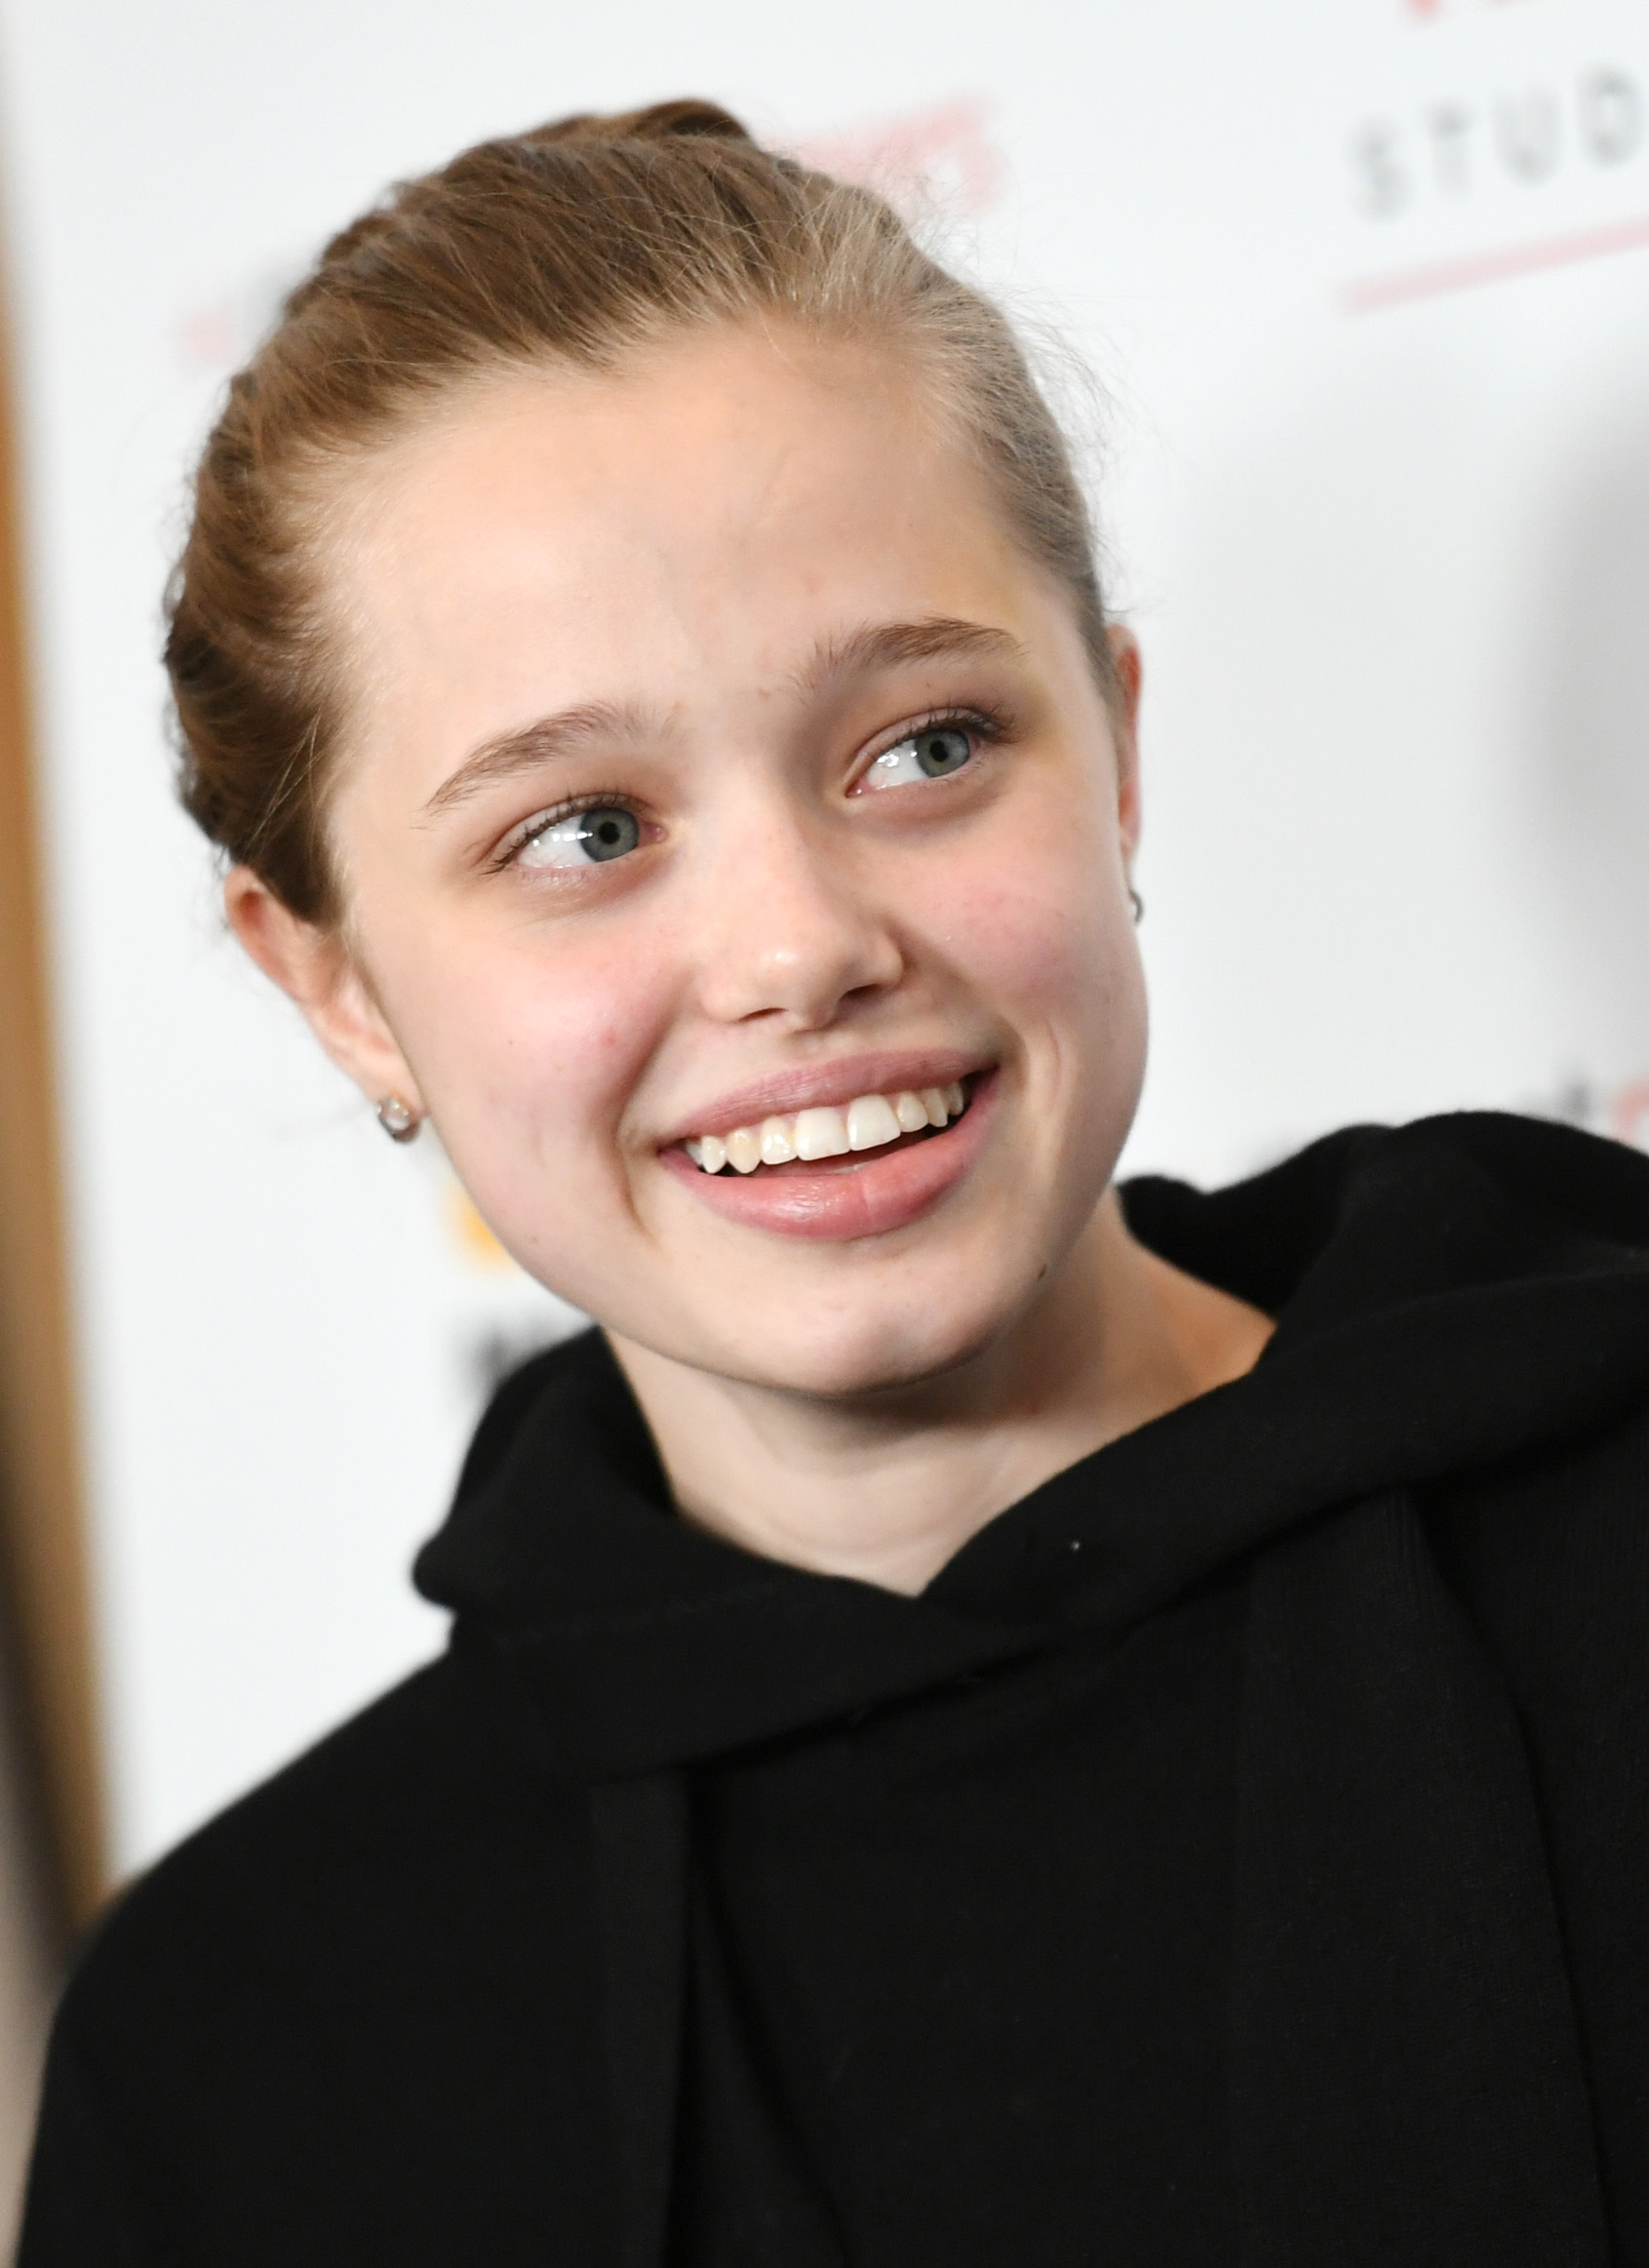 Shiloh Jolie-Pitt during the Los Angeles premiere of "Paper & Glue: A JR Project" at the Museum of Tolerance on November 18, 2021, in Los Angeles, California. | Source: Getty Images